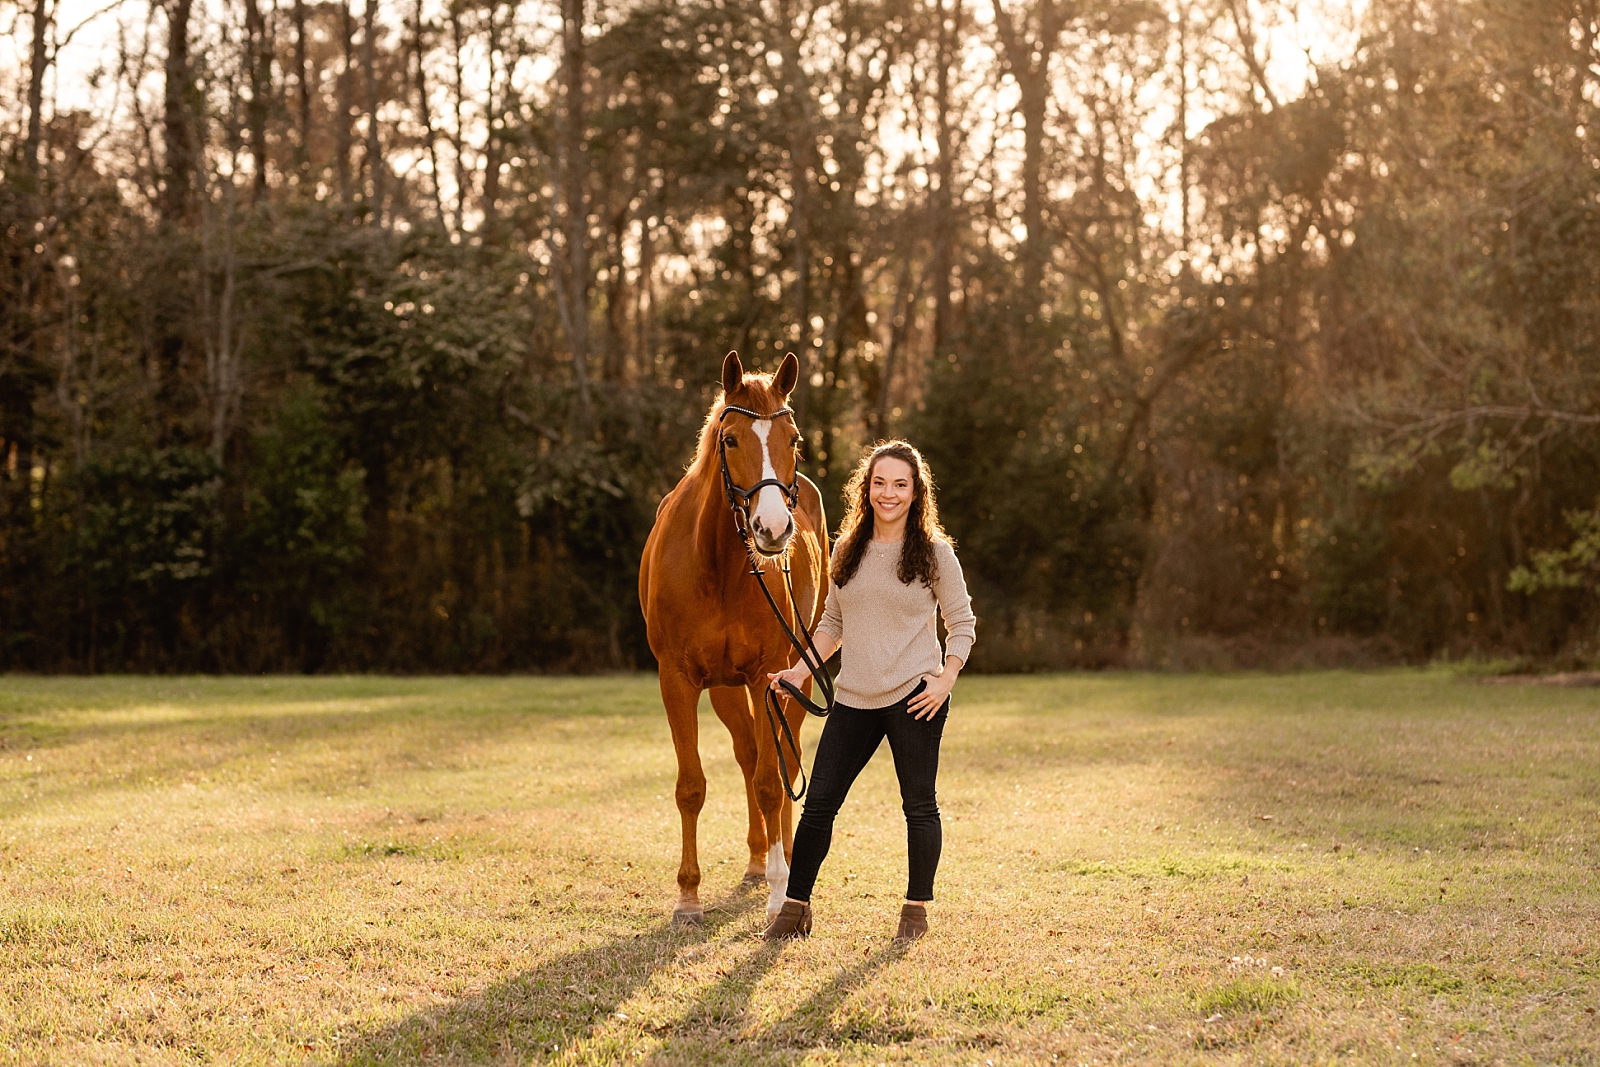 Dressage photographer in North Florida. Spoon Blue Stables in Tallahassee, FL. Chestnut warmblood cross mare. Simple outfit ideas for photos with your horse.